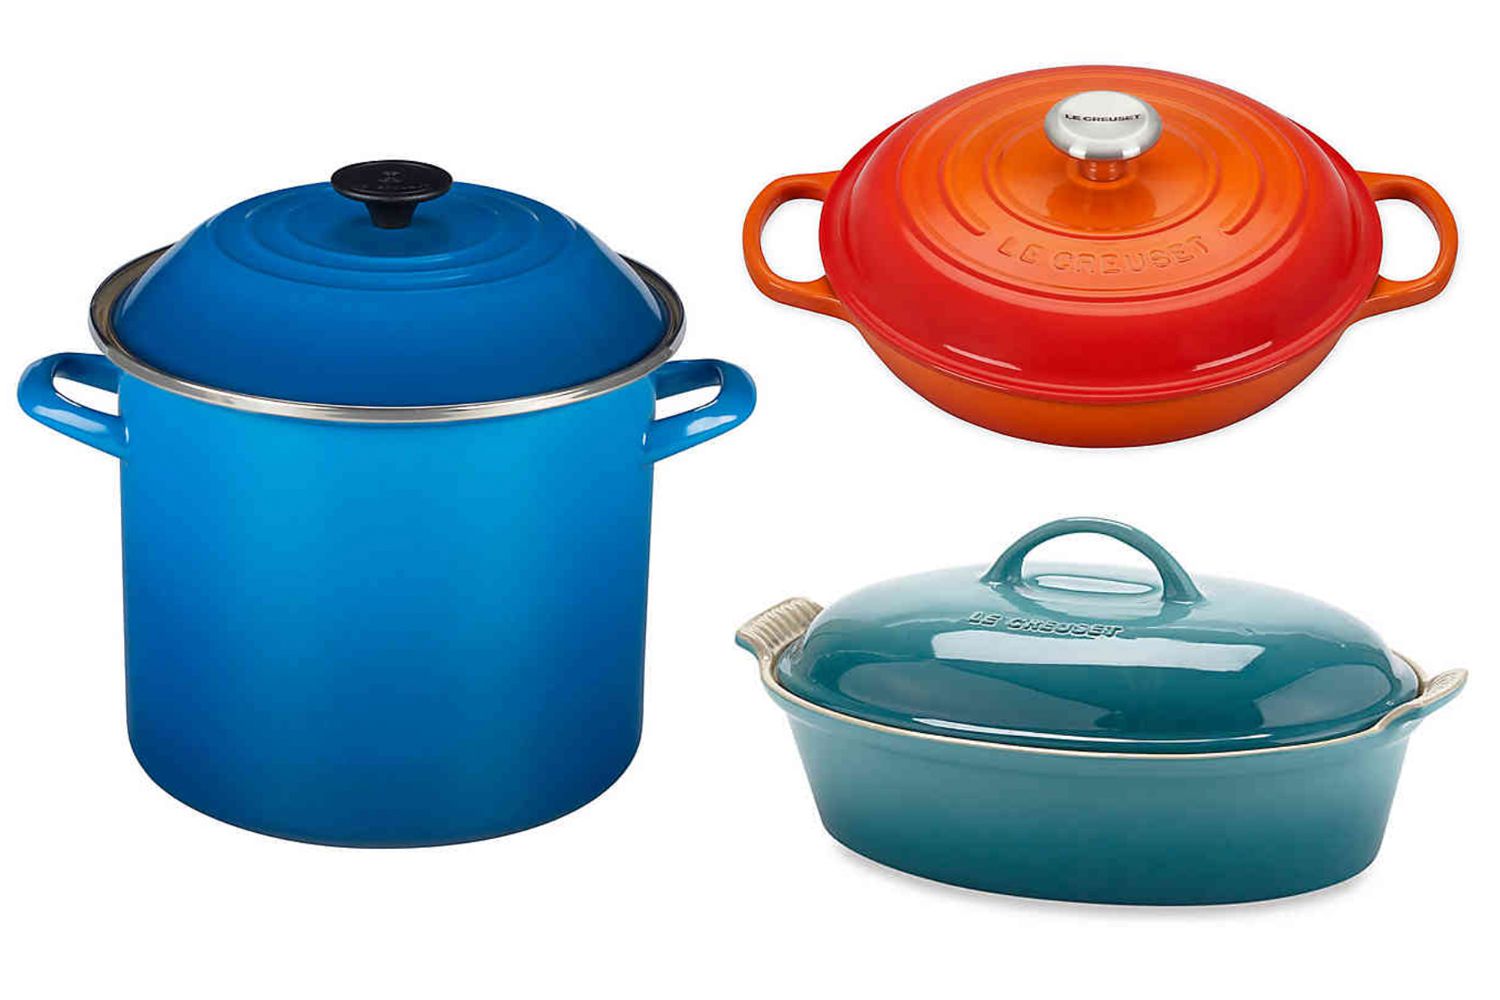 Le Creuset Cookware Is on Sale at Bed Bath & Beyond